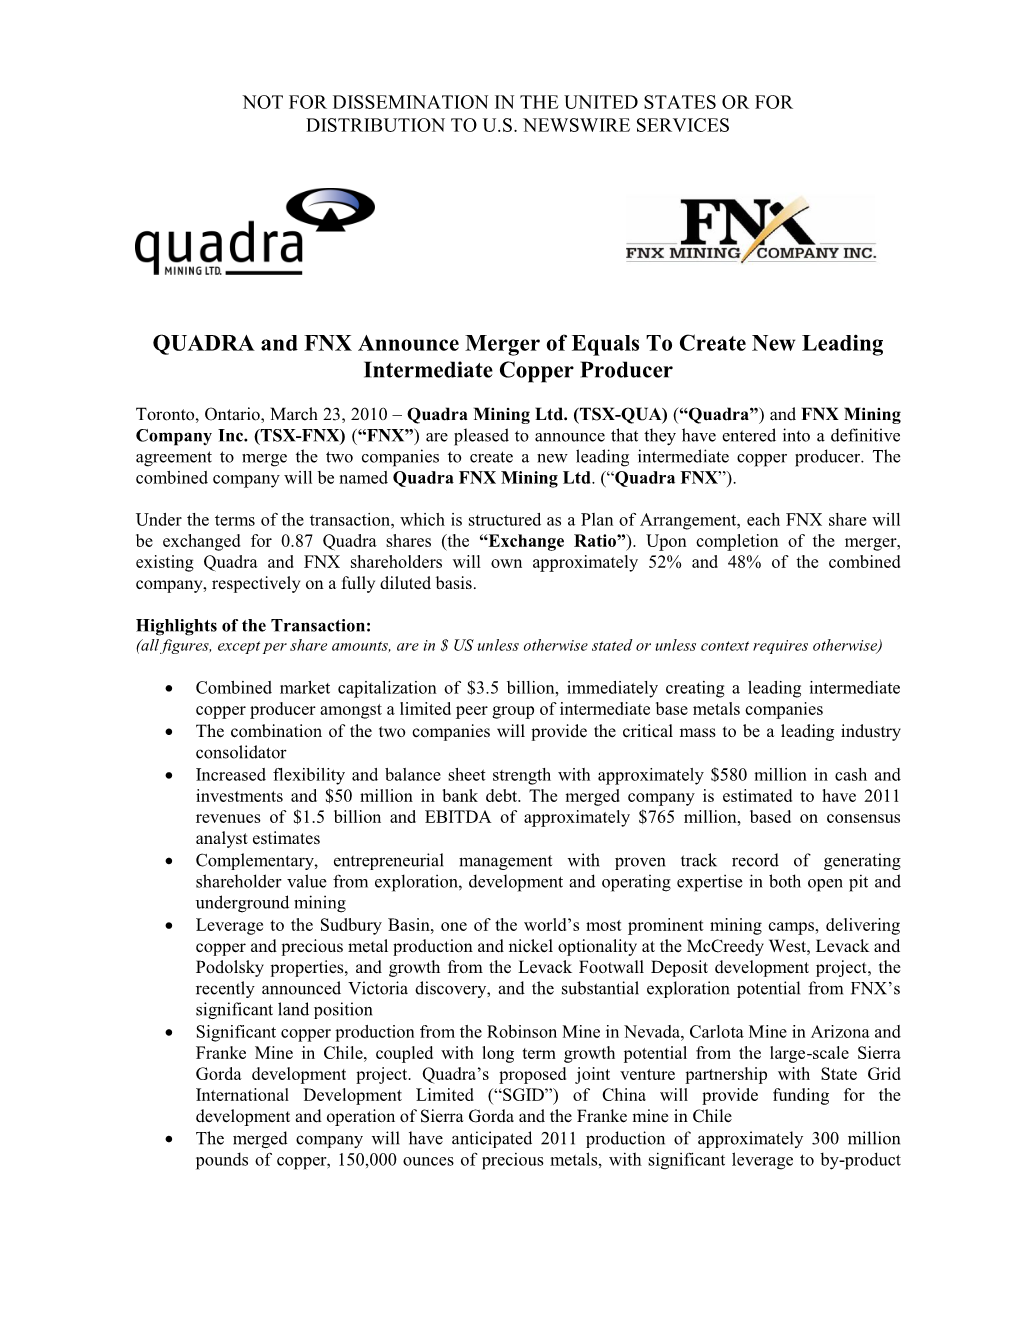 QUADRA and FNX Announce Merger of Equals to Create New Leading Intermediate Copper Producer